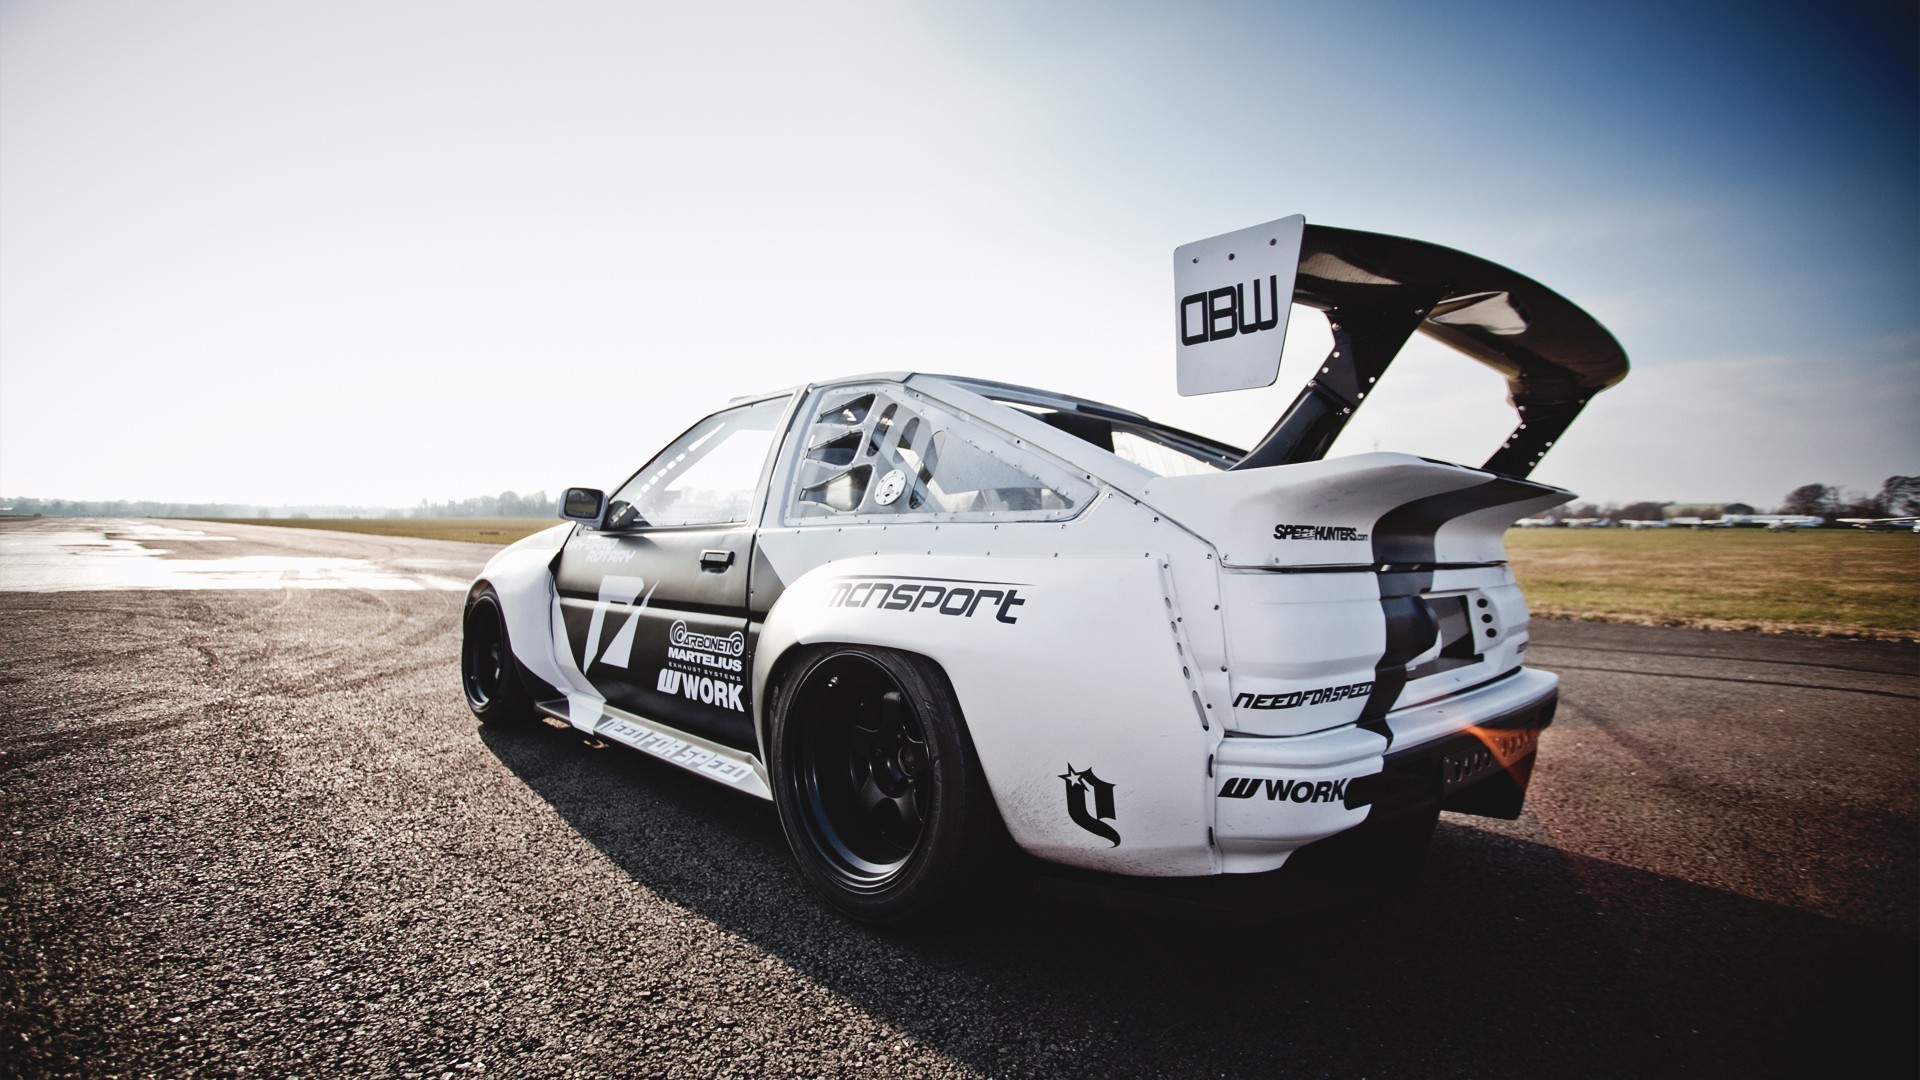 General 1920x1080 vehicle white cars car race cars motorsport livery